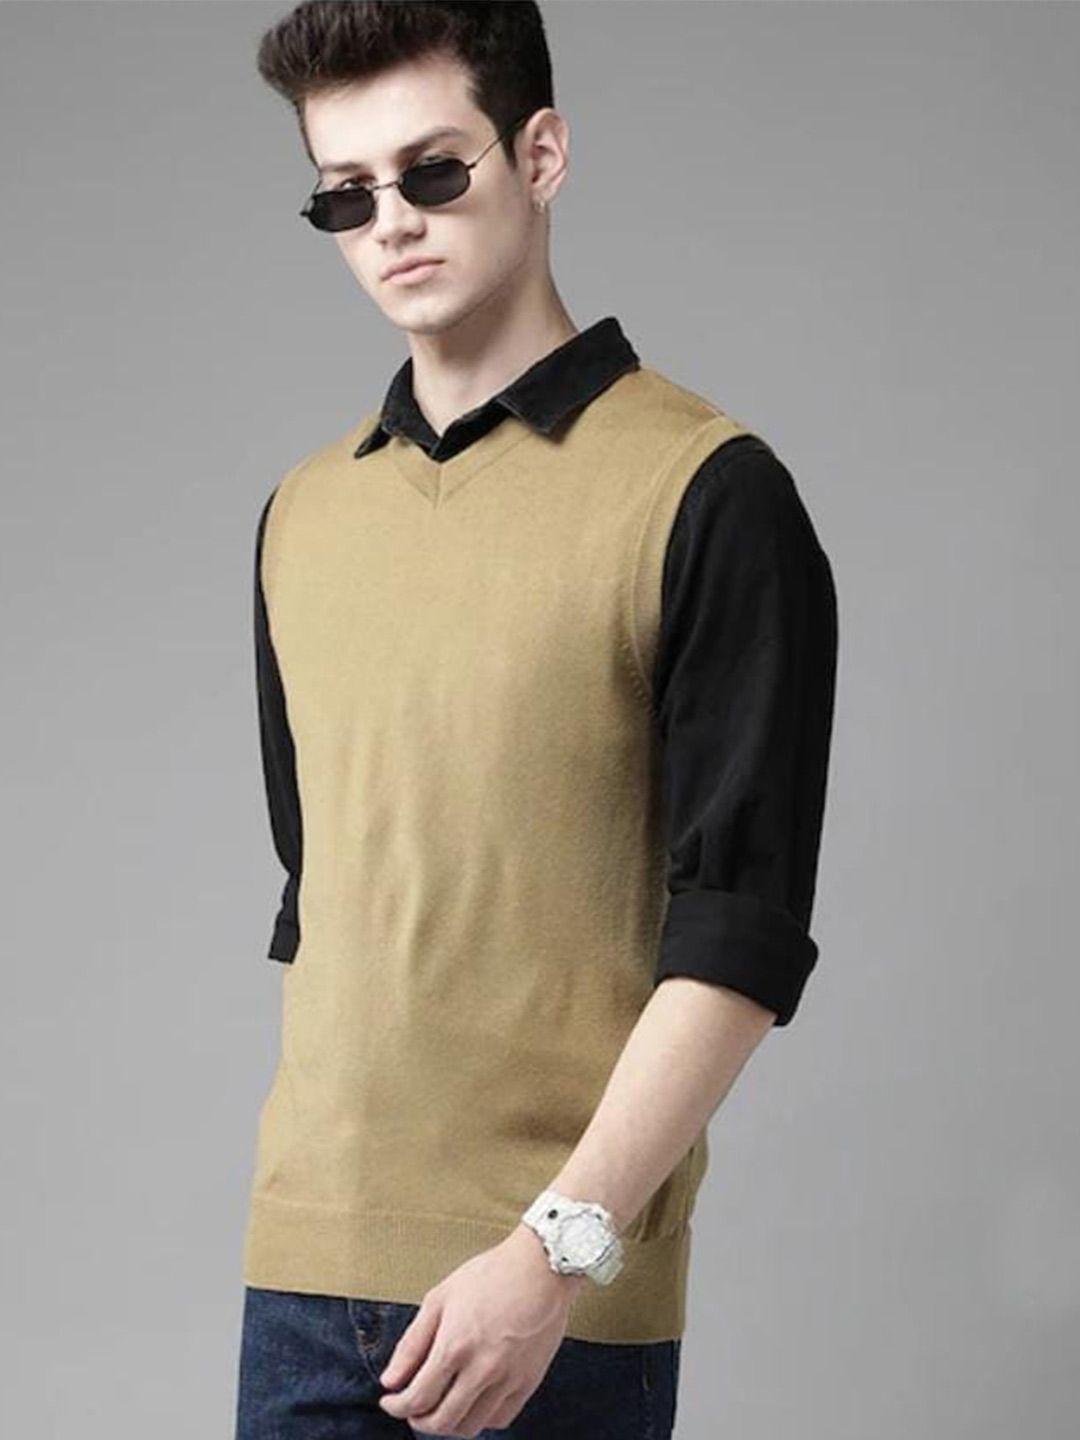 the-roadster-lifestyle-co.-beige-sleeveless-acrylic-sweater-vest